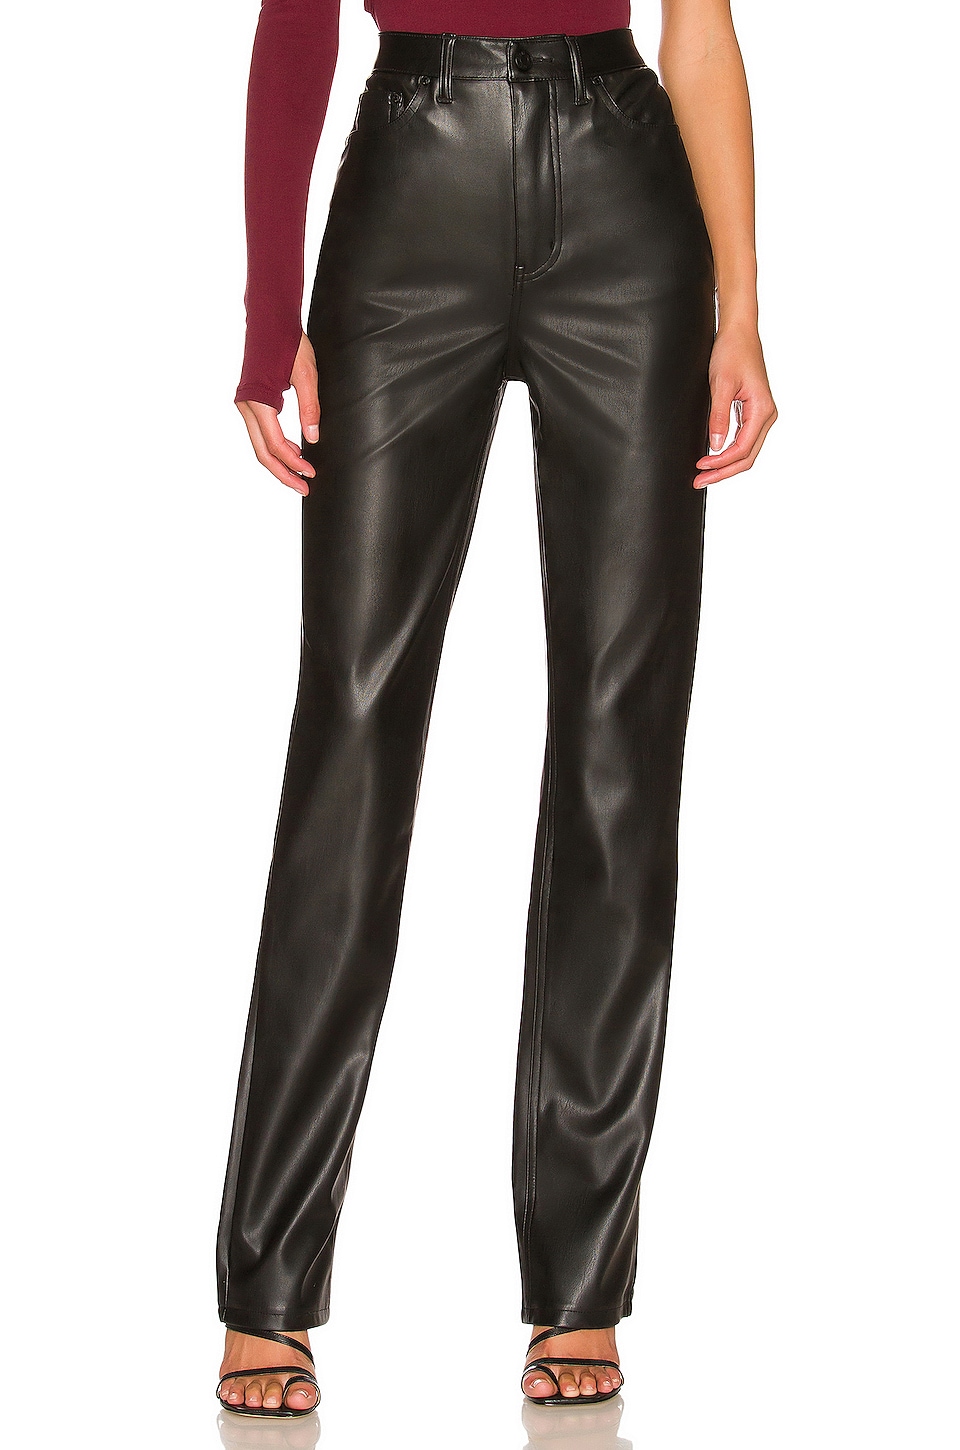 Truly Chic Faux Leather Pant 29 - Black